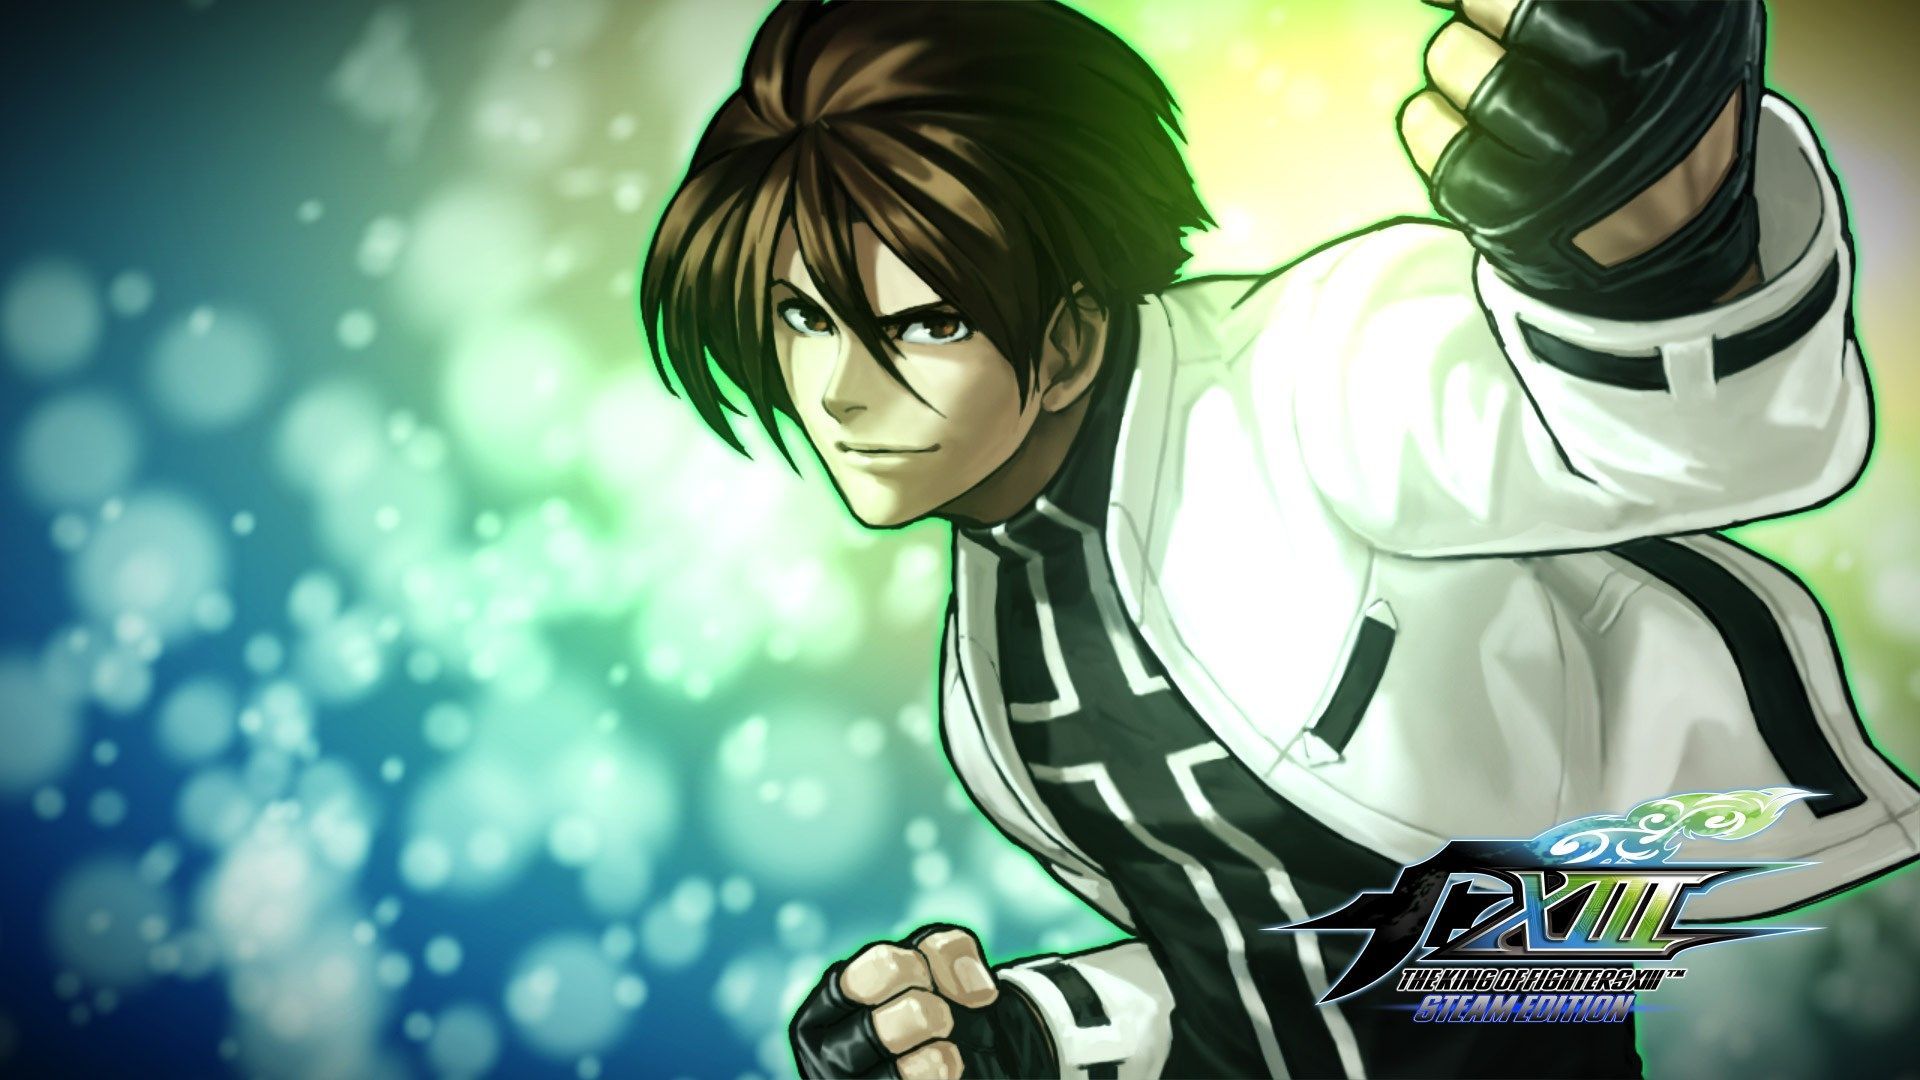 The King of Fighters XIII: Steam Edition game wallpaper. King of fighters, Fighter, Art of fighting